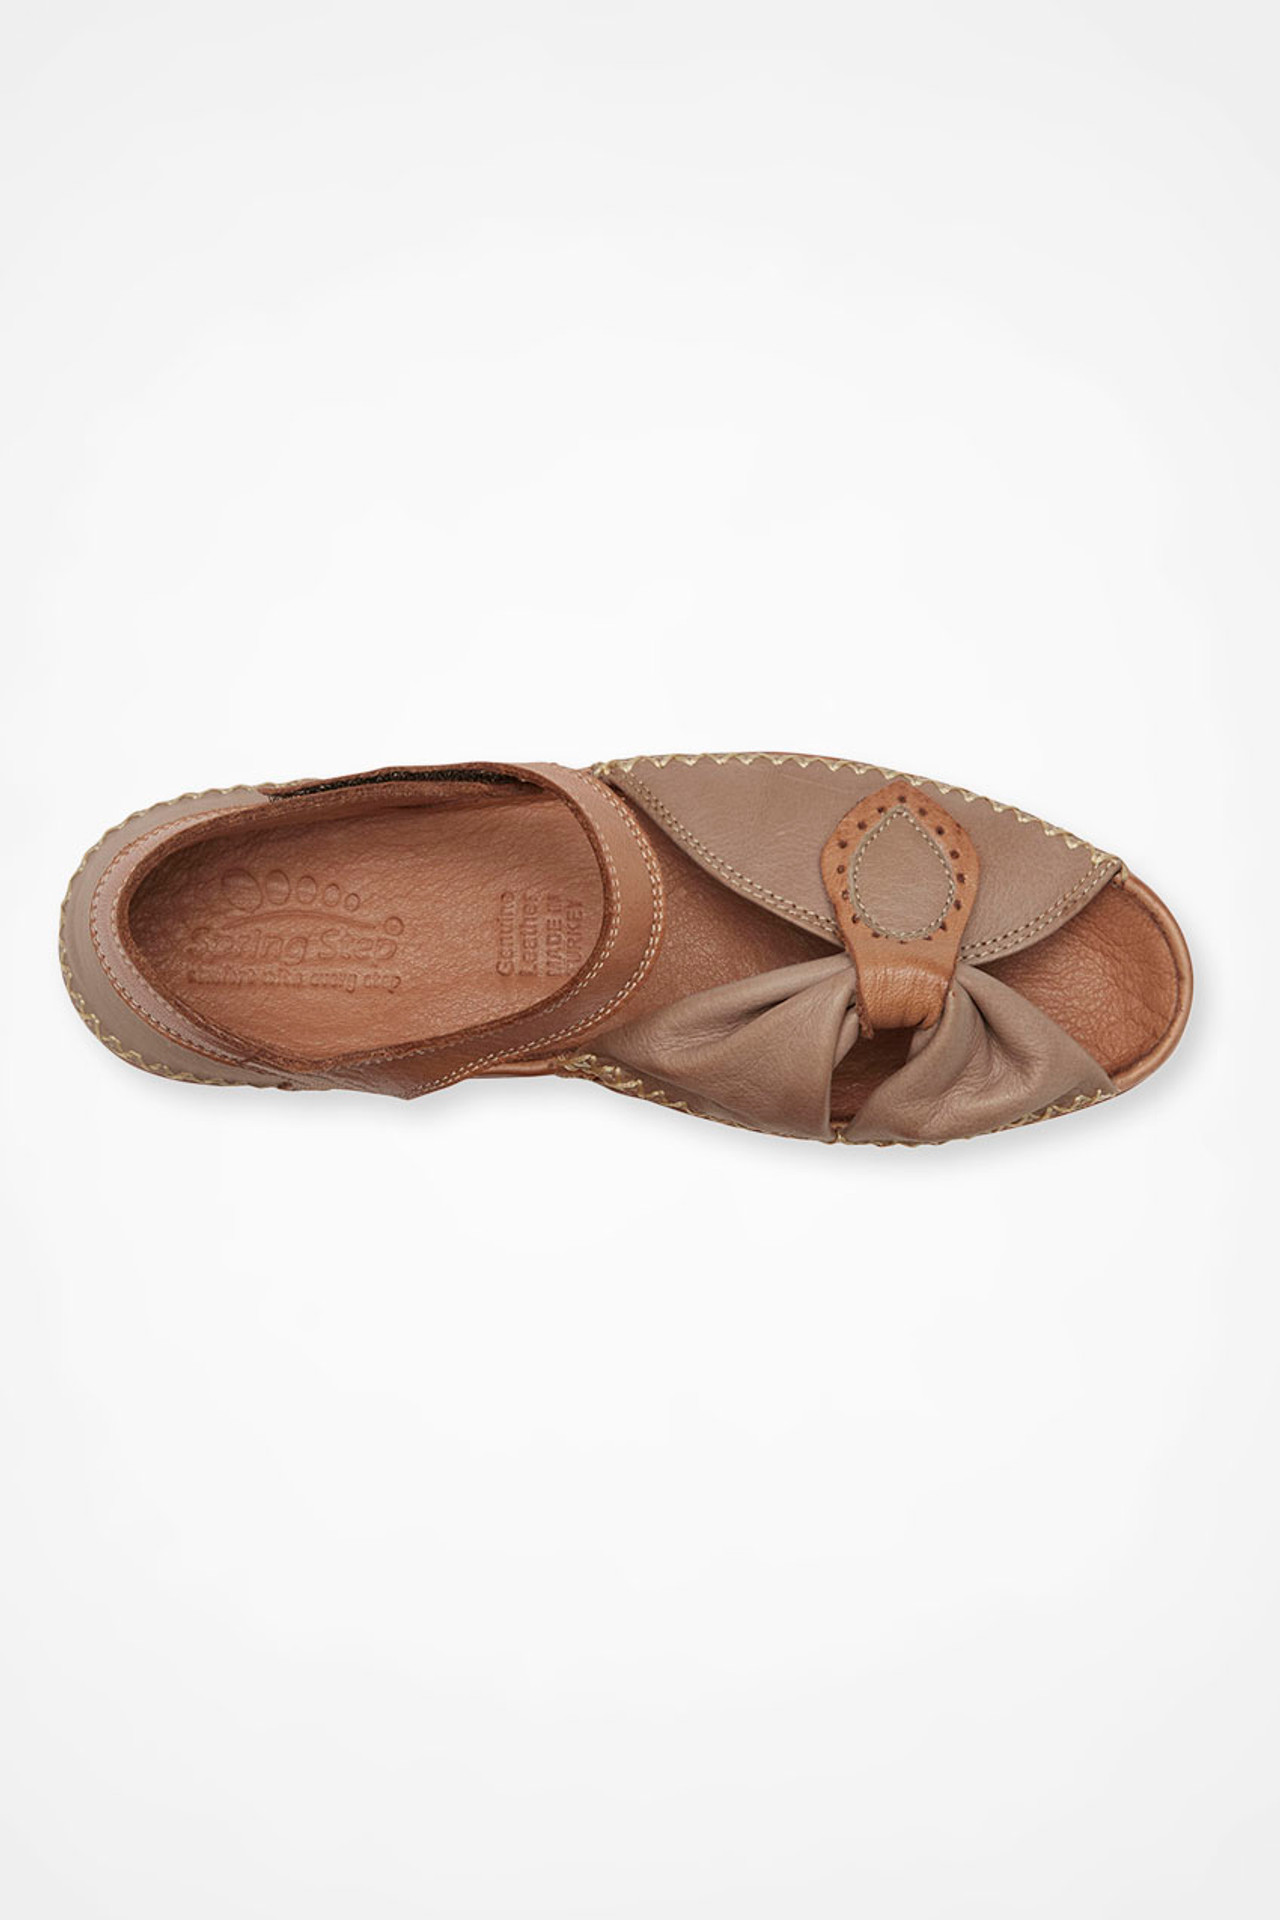 Leather Sandals - Buy Leather Sandals Online | Mochi Shoes